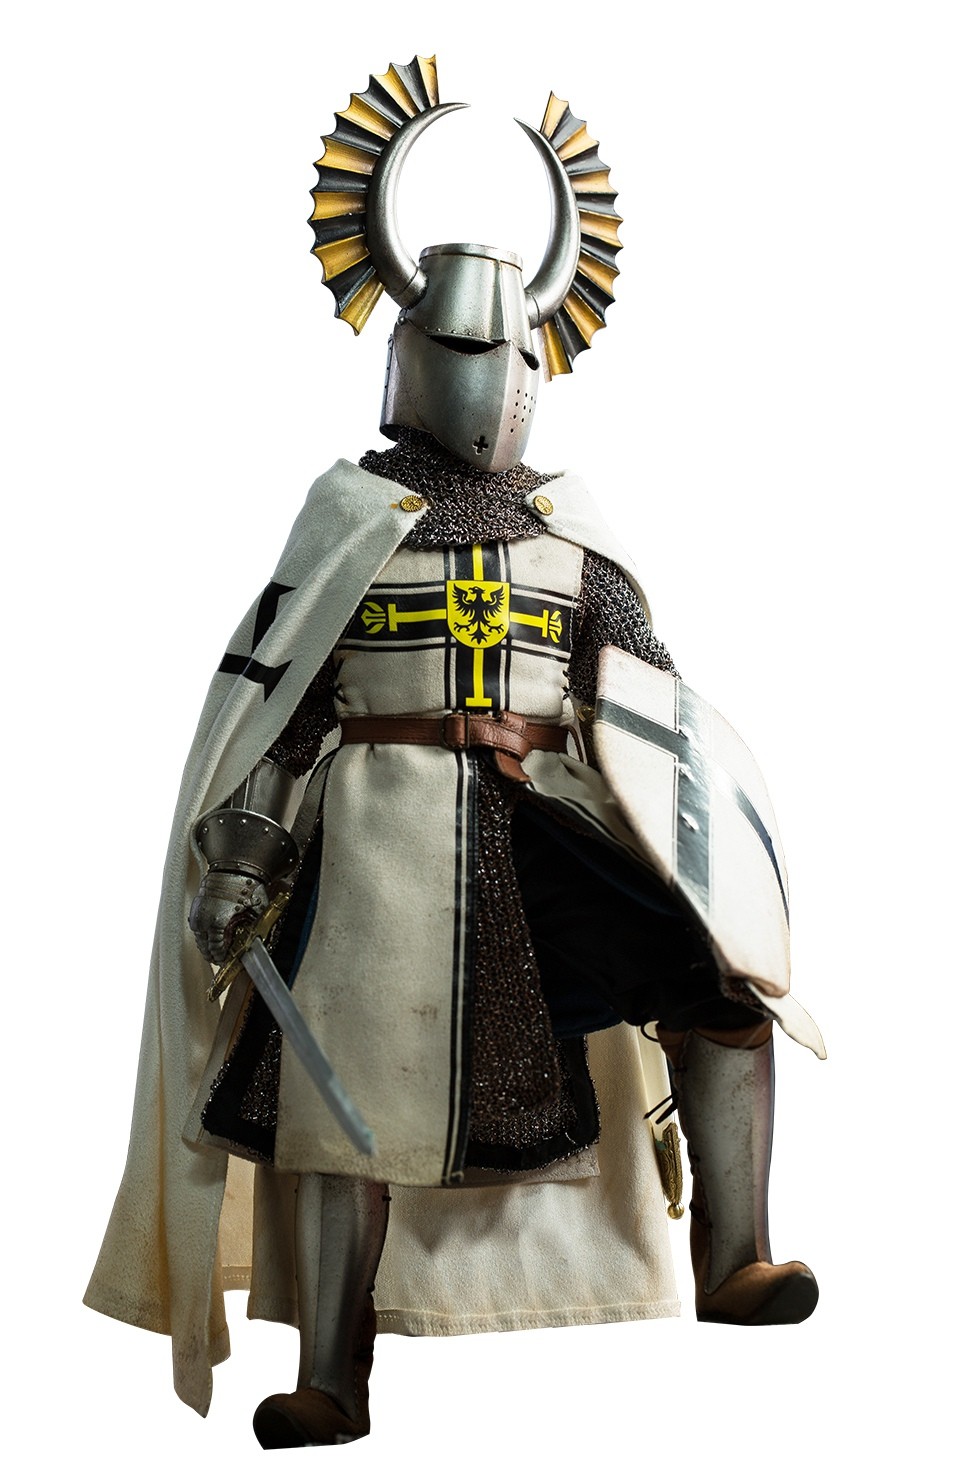 Coomodels 1/6 Scale Series of Empires Teutonic Sergeant Standard Alloy Version SE109